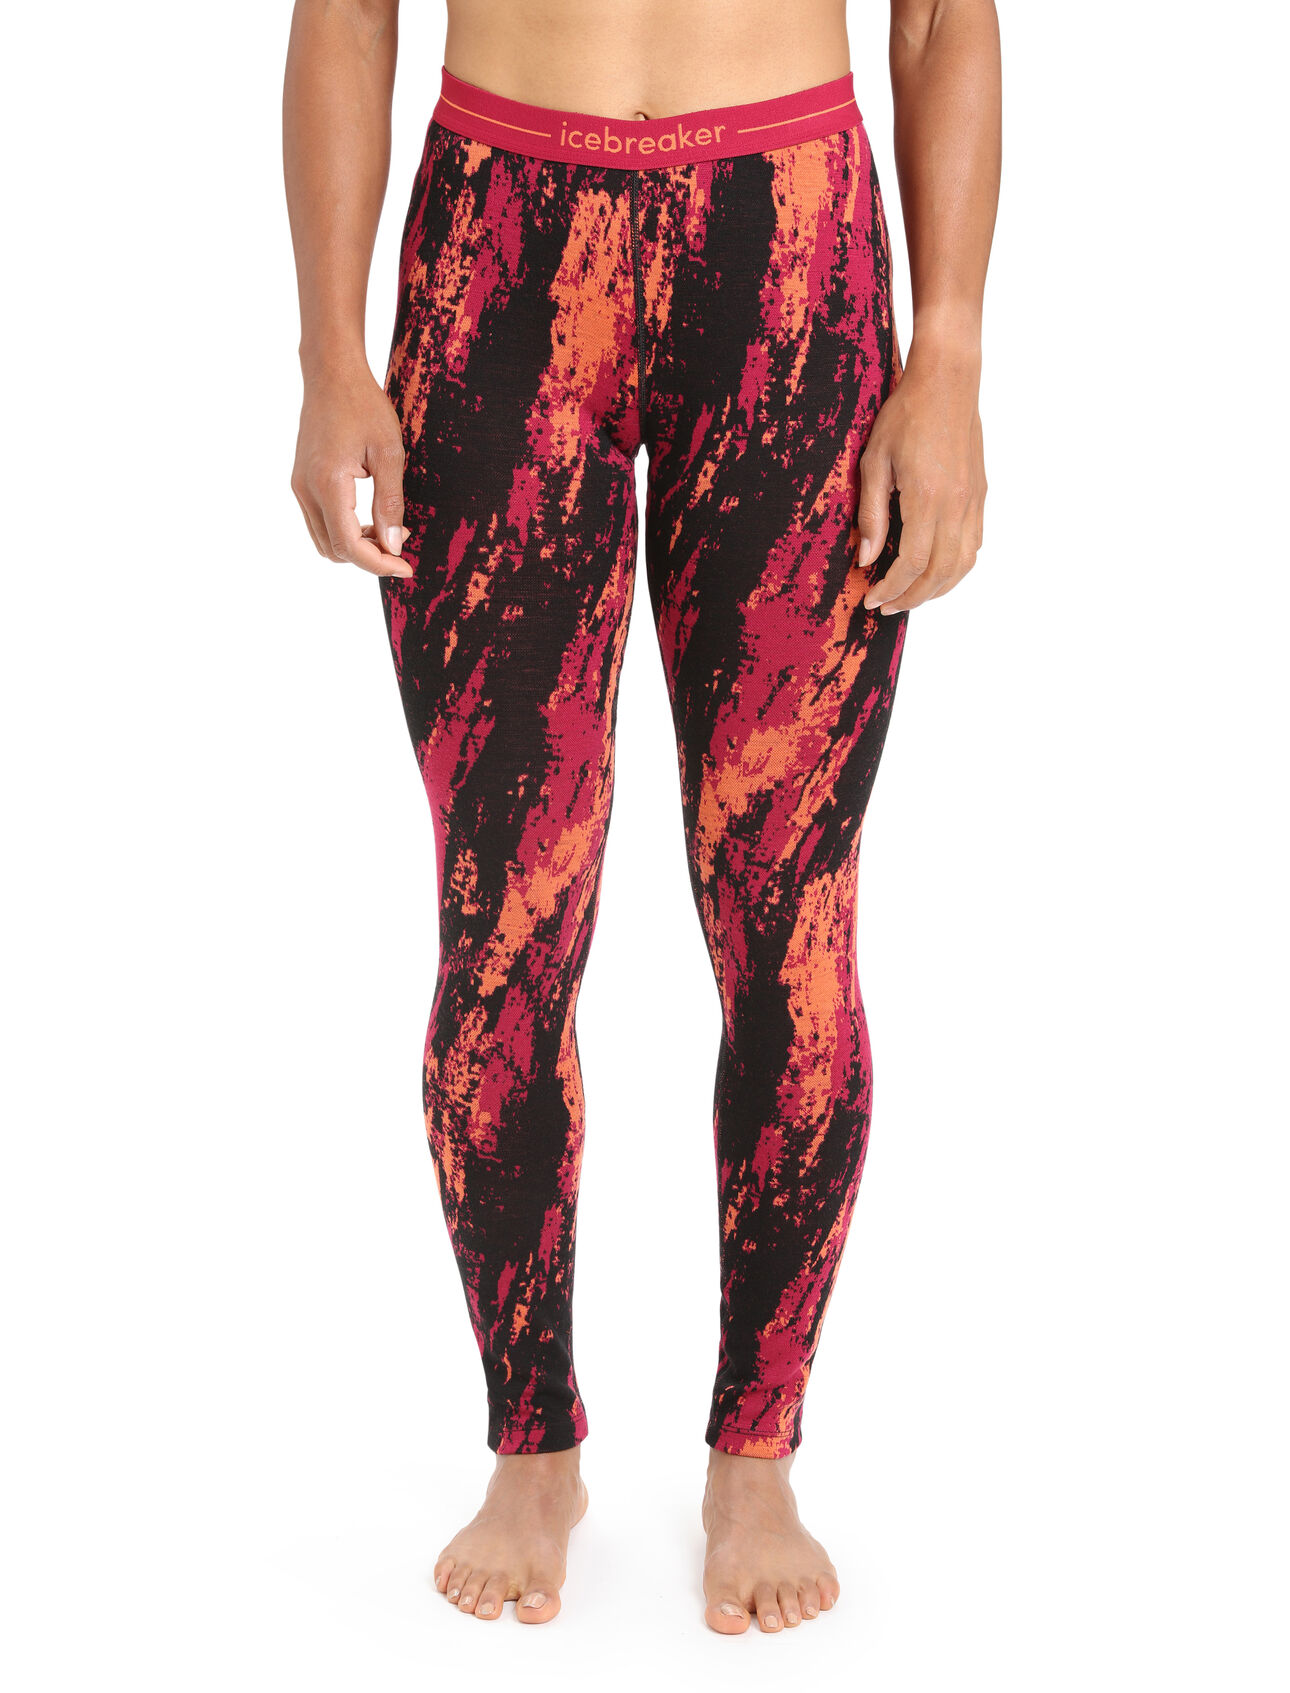 Womens Merino 250 Vertex Leggings Sedimentary Incredibly warm merino base layer bottoms with a unique jacquard pattern, the 250 Vertex Leggings Sedimentary are a go-to piece for winter layering—ideal for skiing, snowshoeing and other cold-weather pursuits. The all-over graphic print draws inspiration from the geologic layers of the world's mountains.